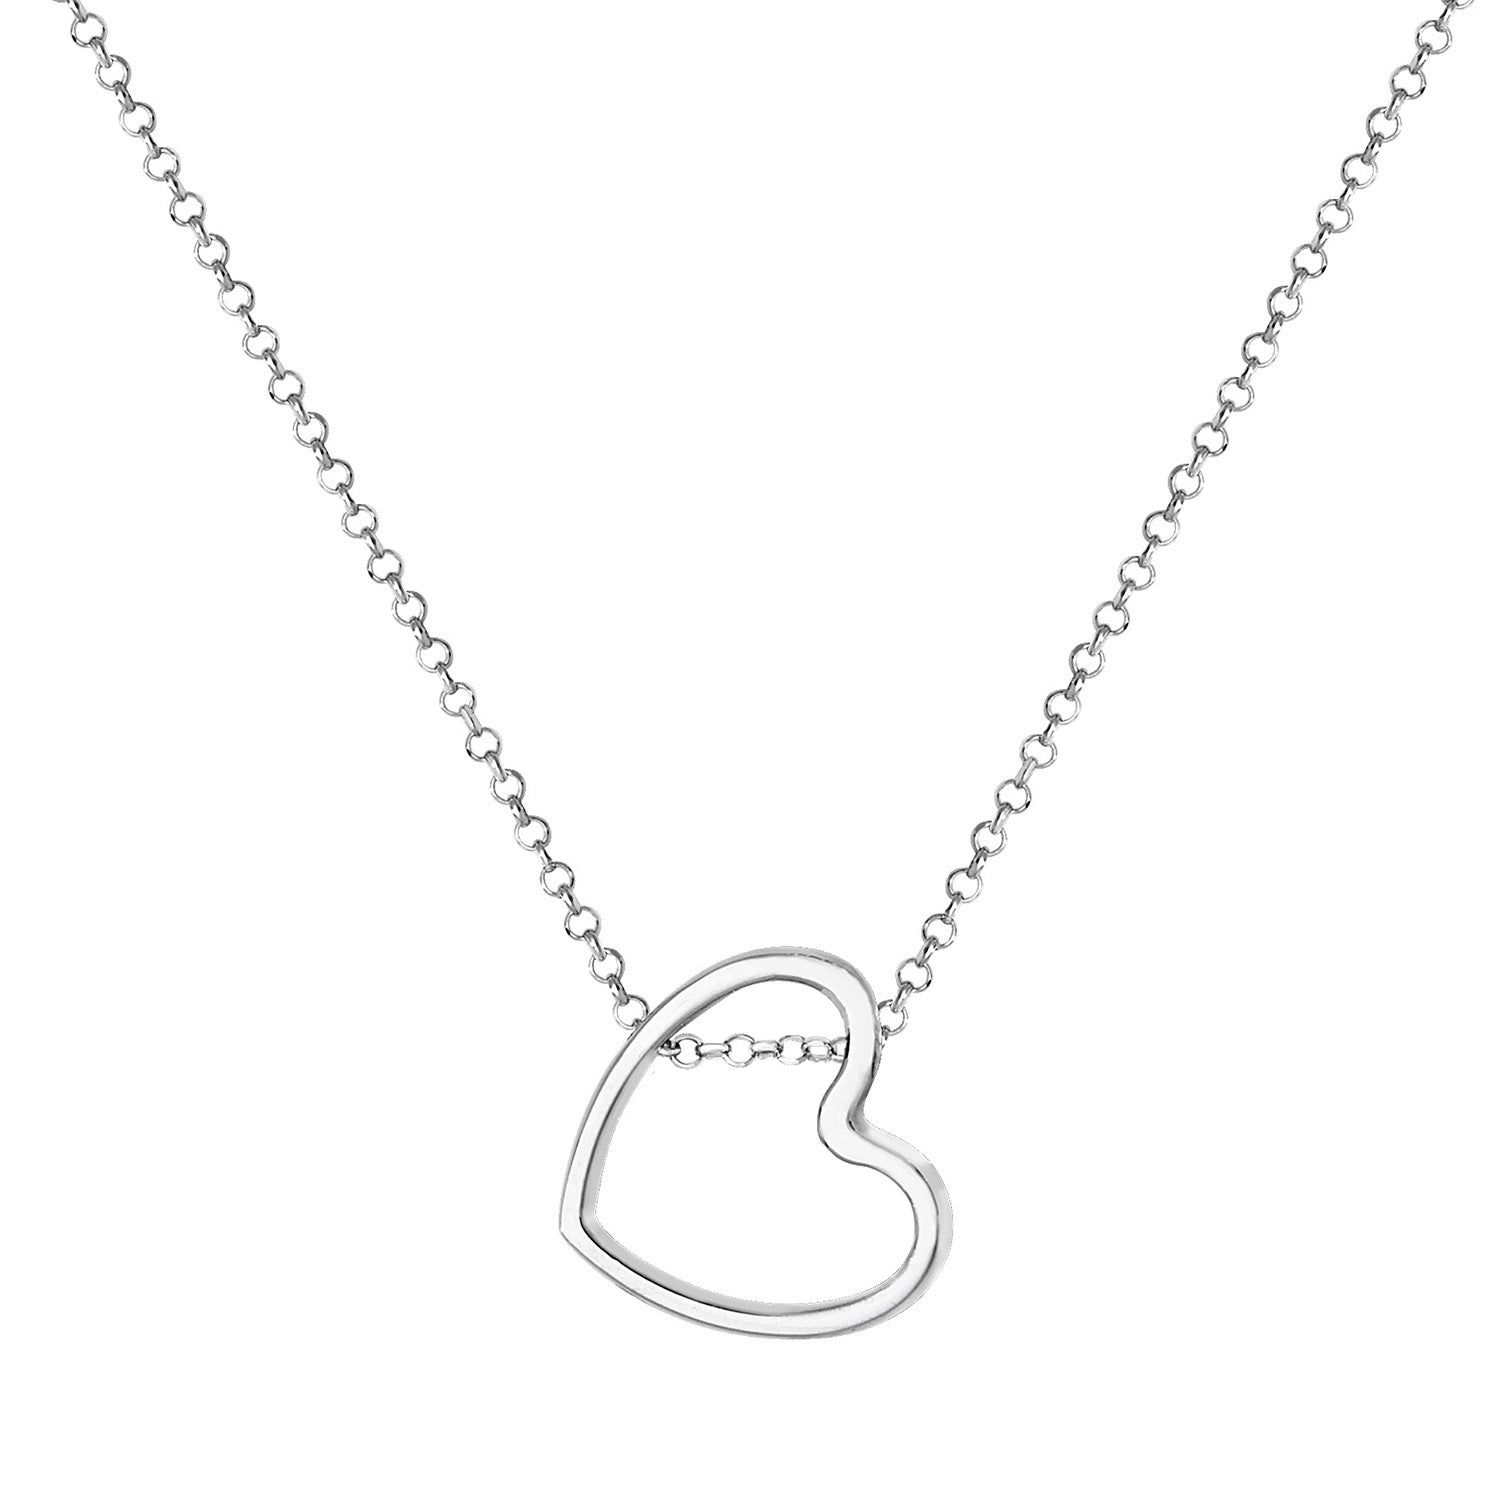 SILVER RHODIUM PLATED OPEN HEART NECKLET